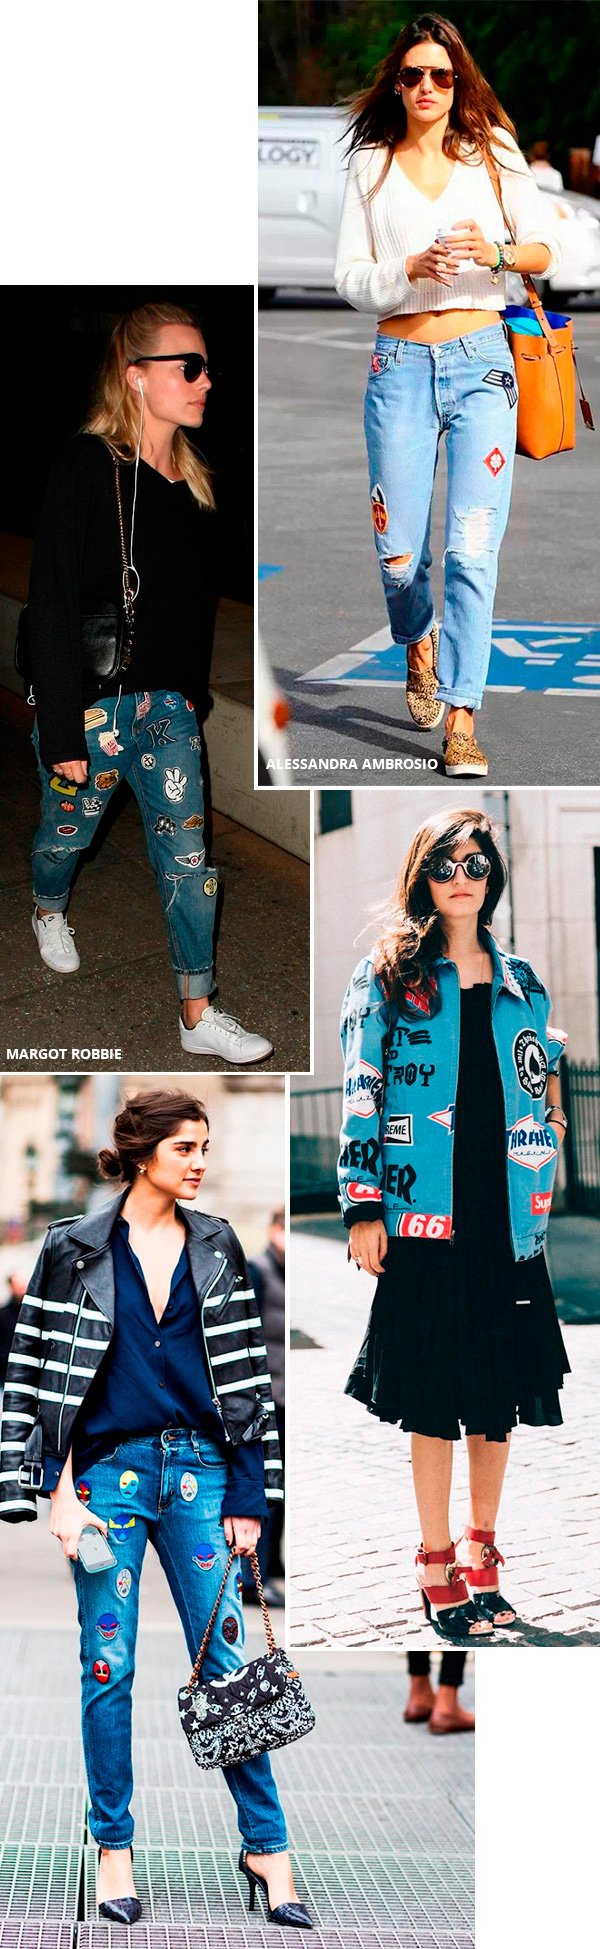 Street style look com patches.